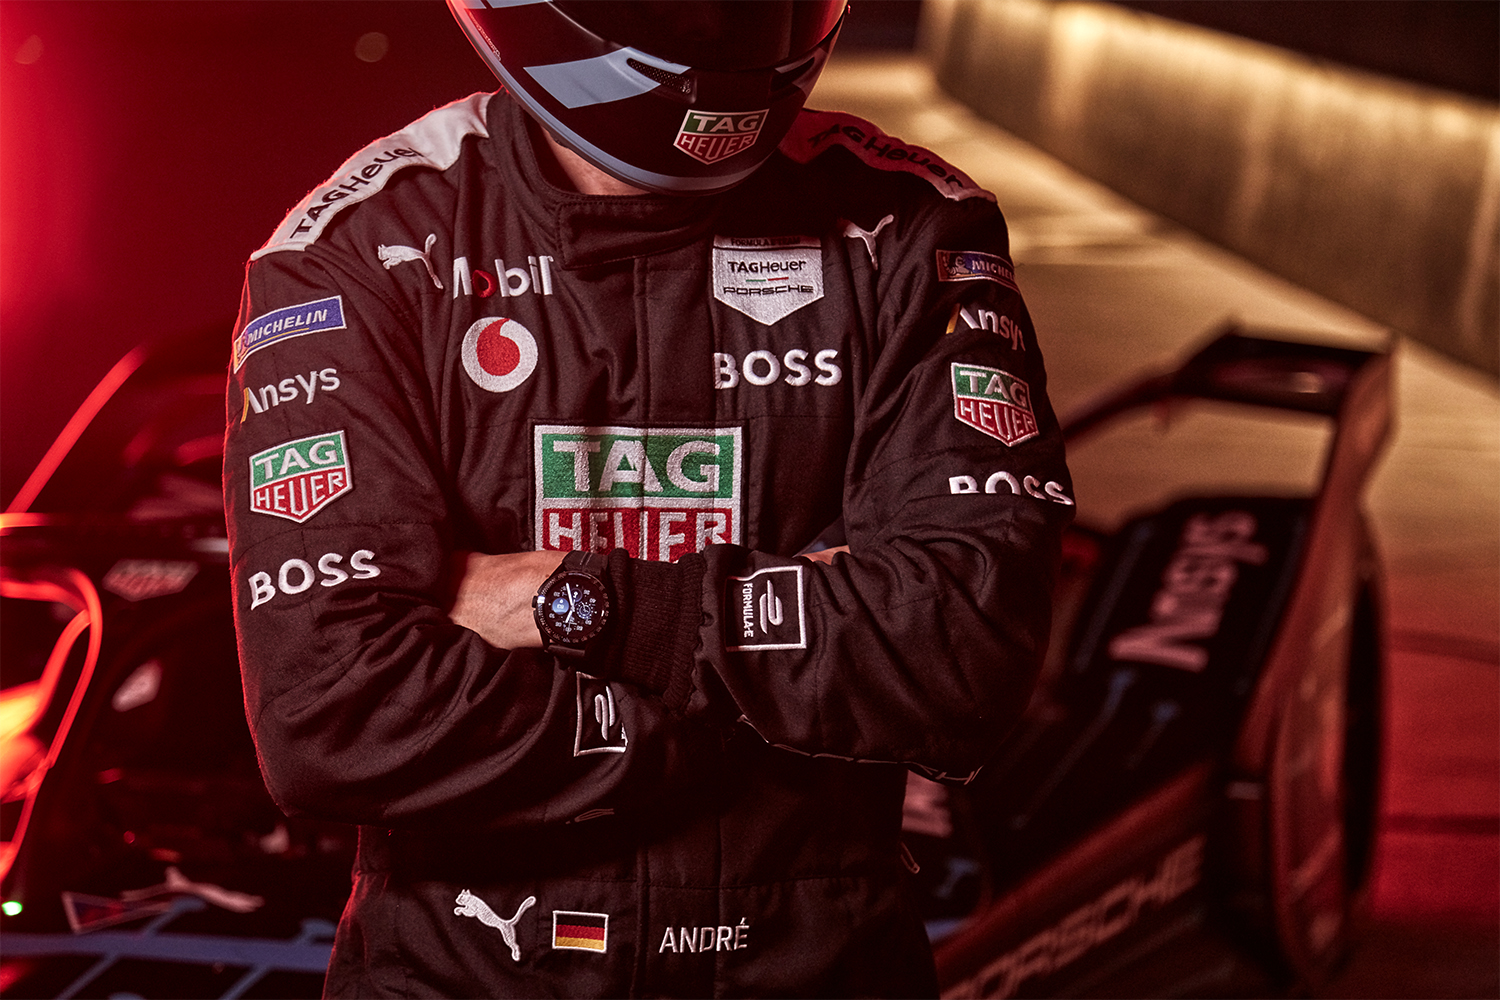 a model in porsche gear wearing the new Tag Heuer Calibre E4 watch